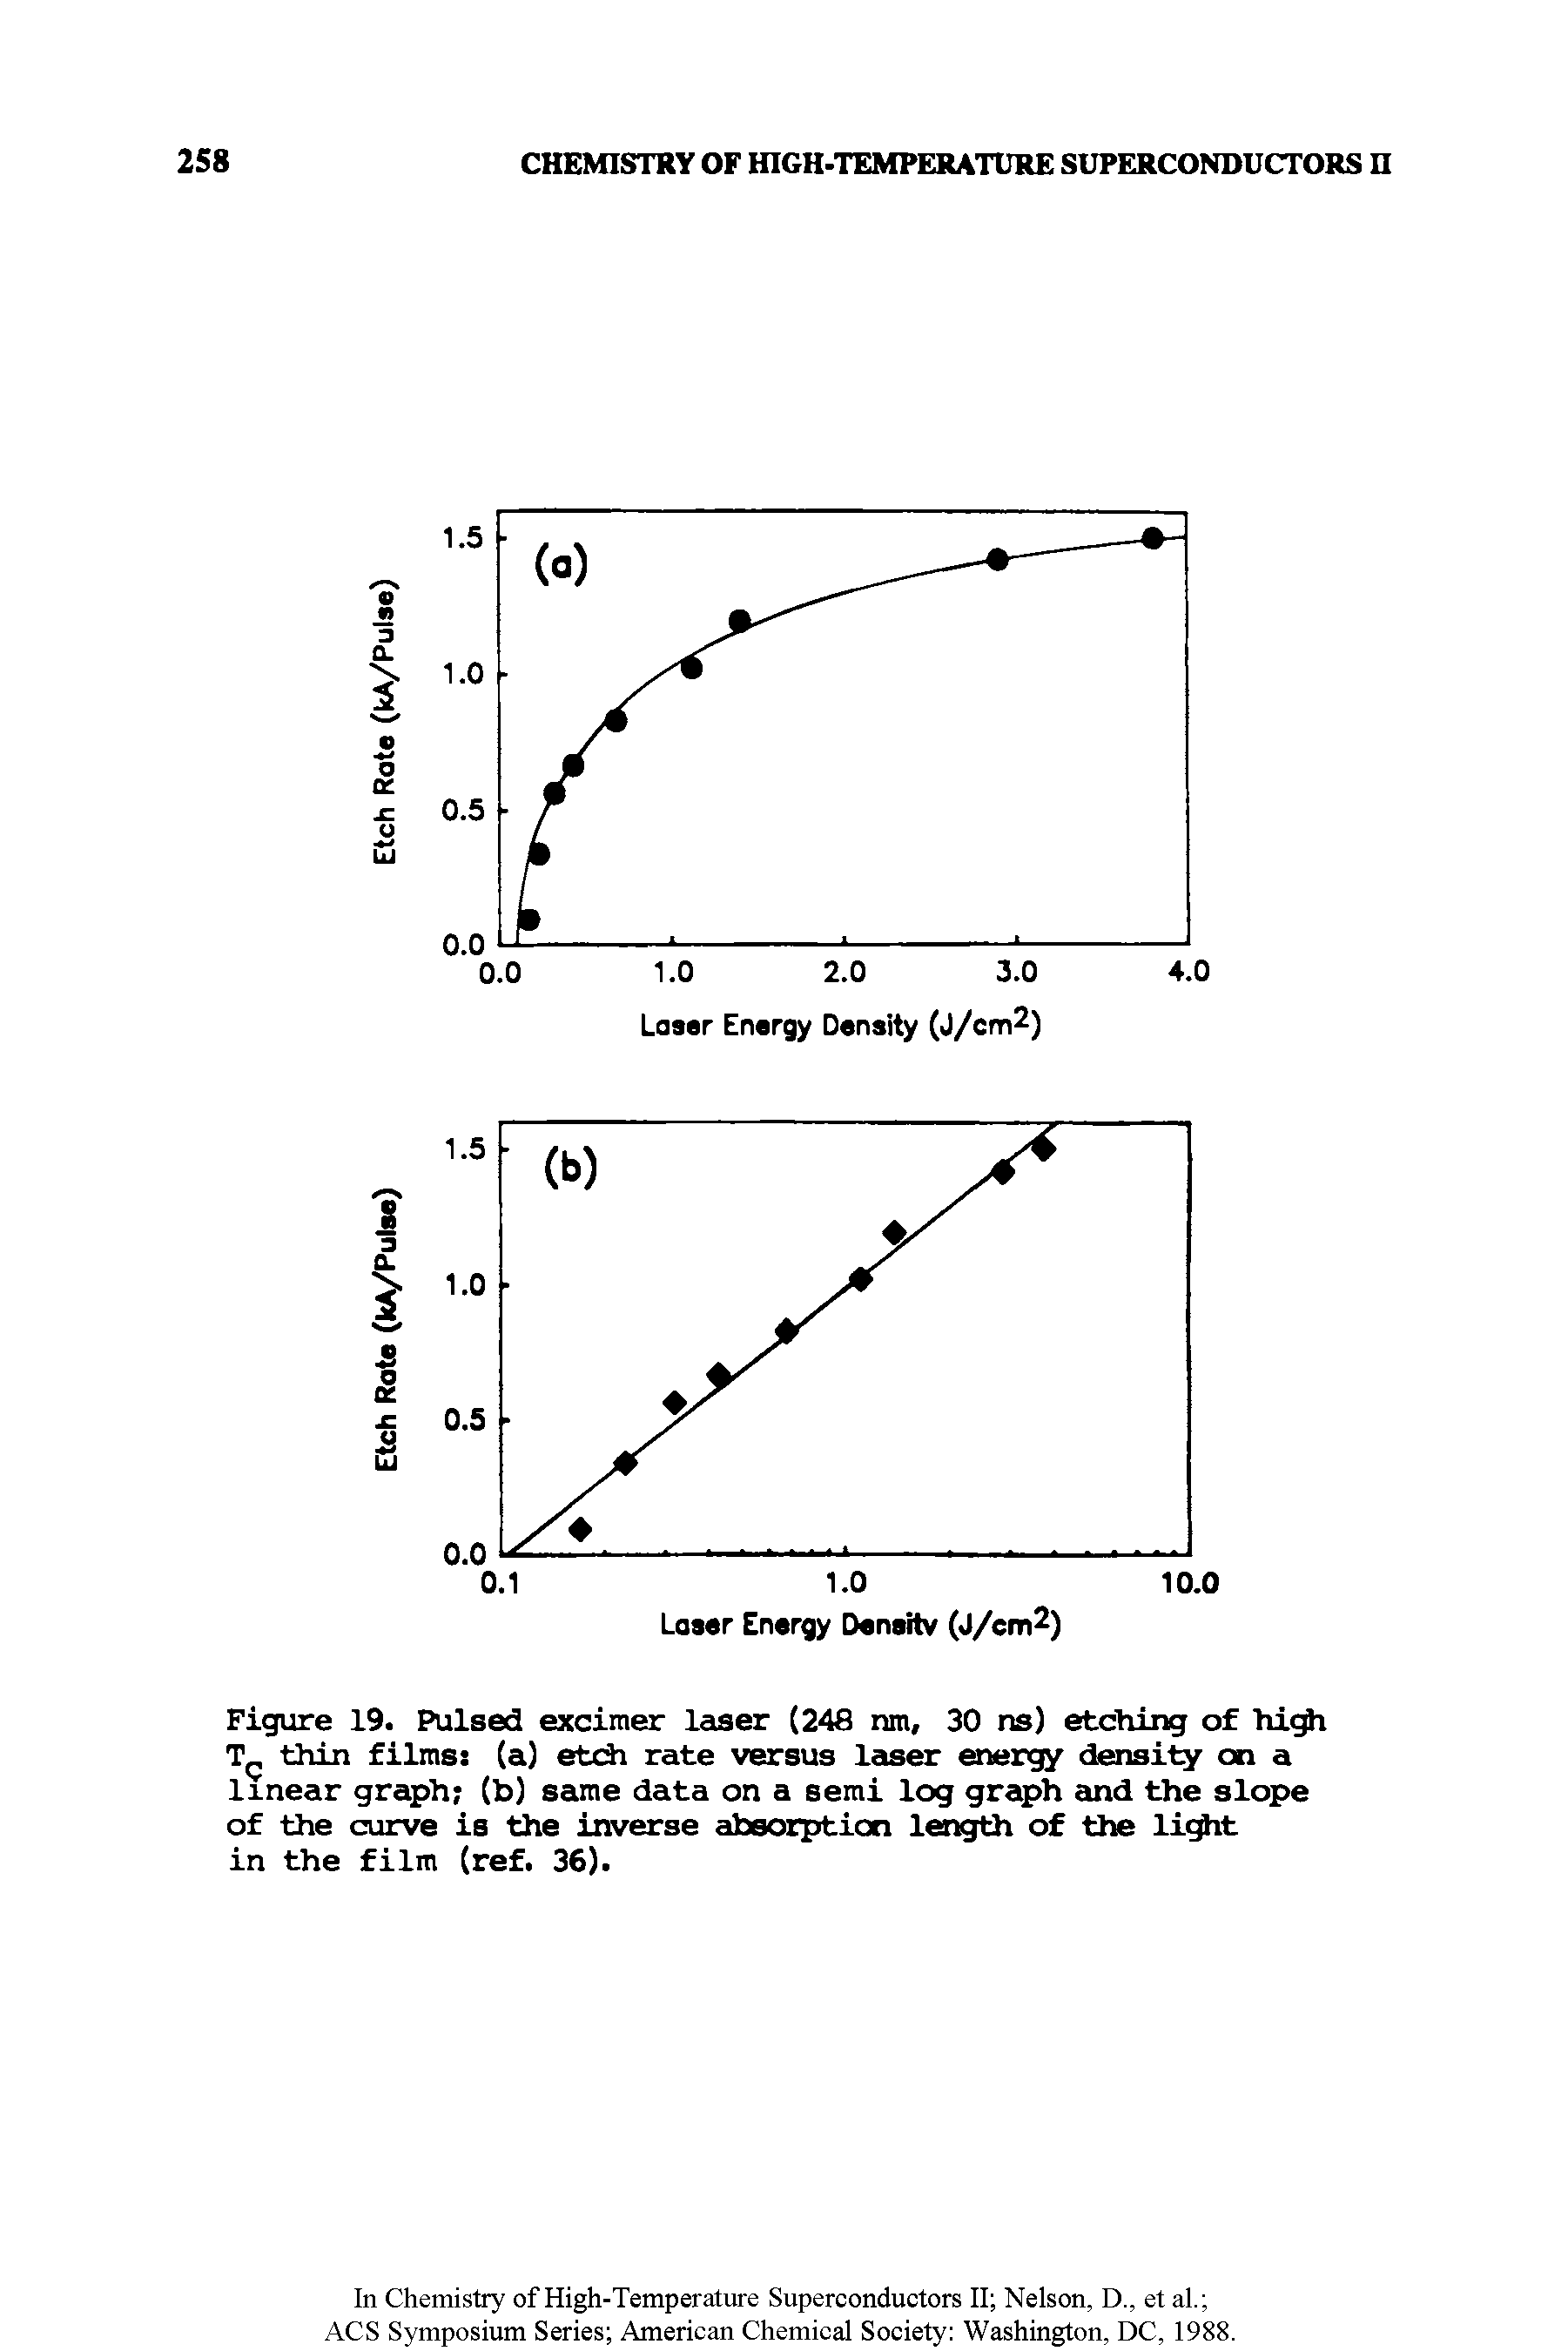 Figure 19. Pulsed excimer laser (248 nm, 30 ns) etching of high thin films (a) etch rate versus laser energy density on a linear graph (b) same data on a semi log graph cind the slope of the curve is the inverse absorption length of the light in the film (ref. 36).